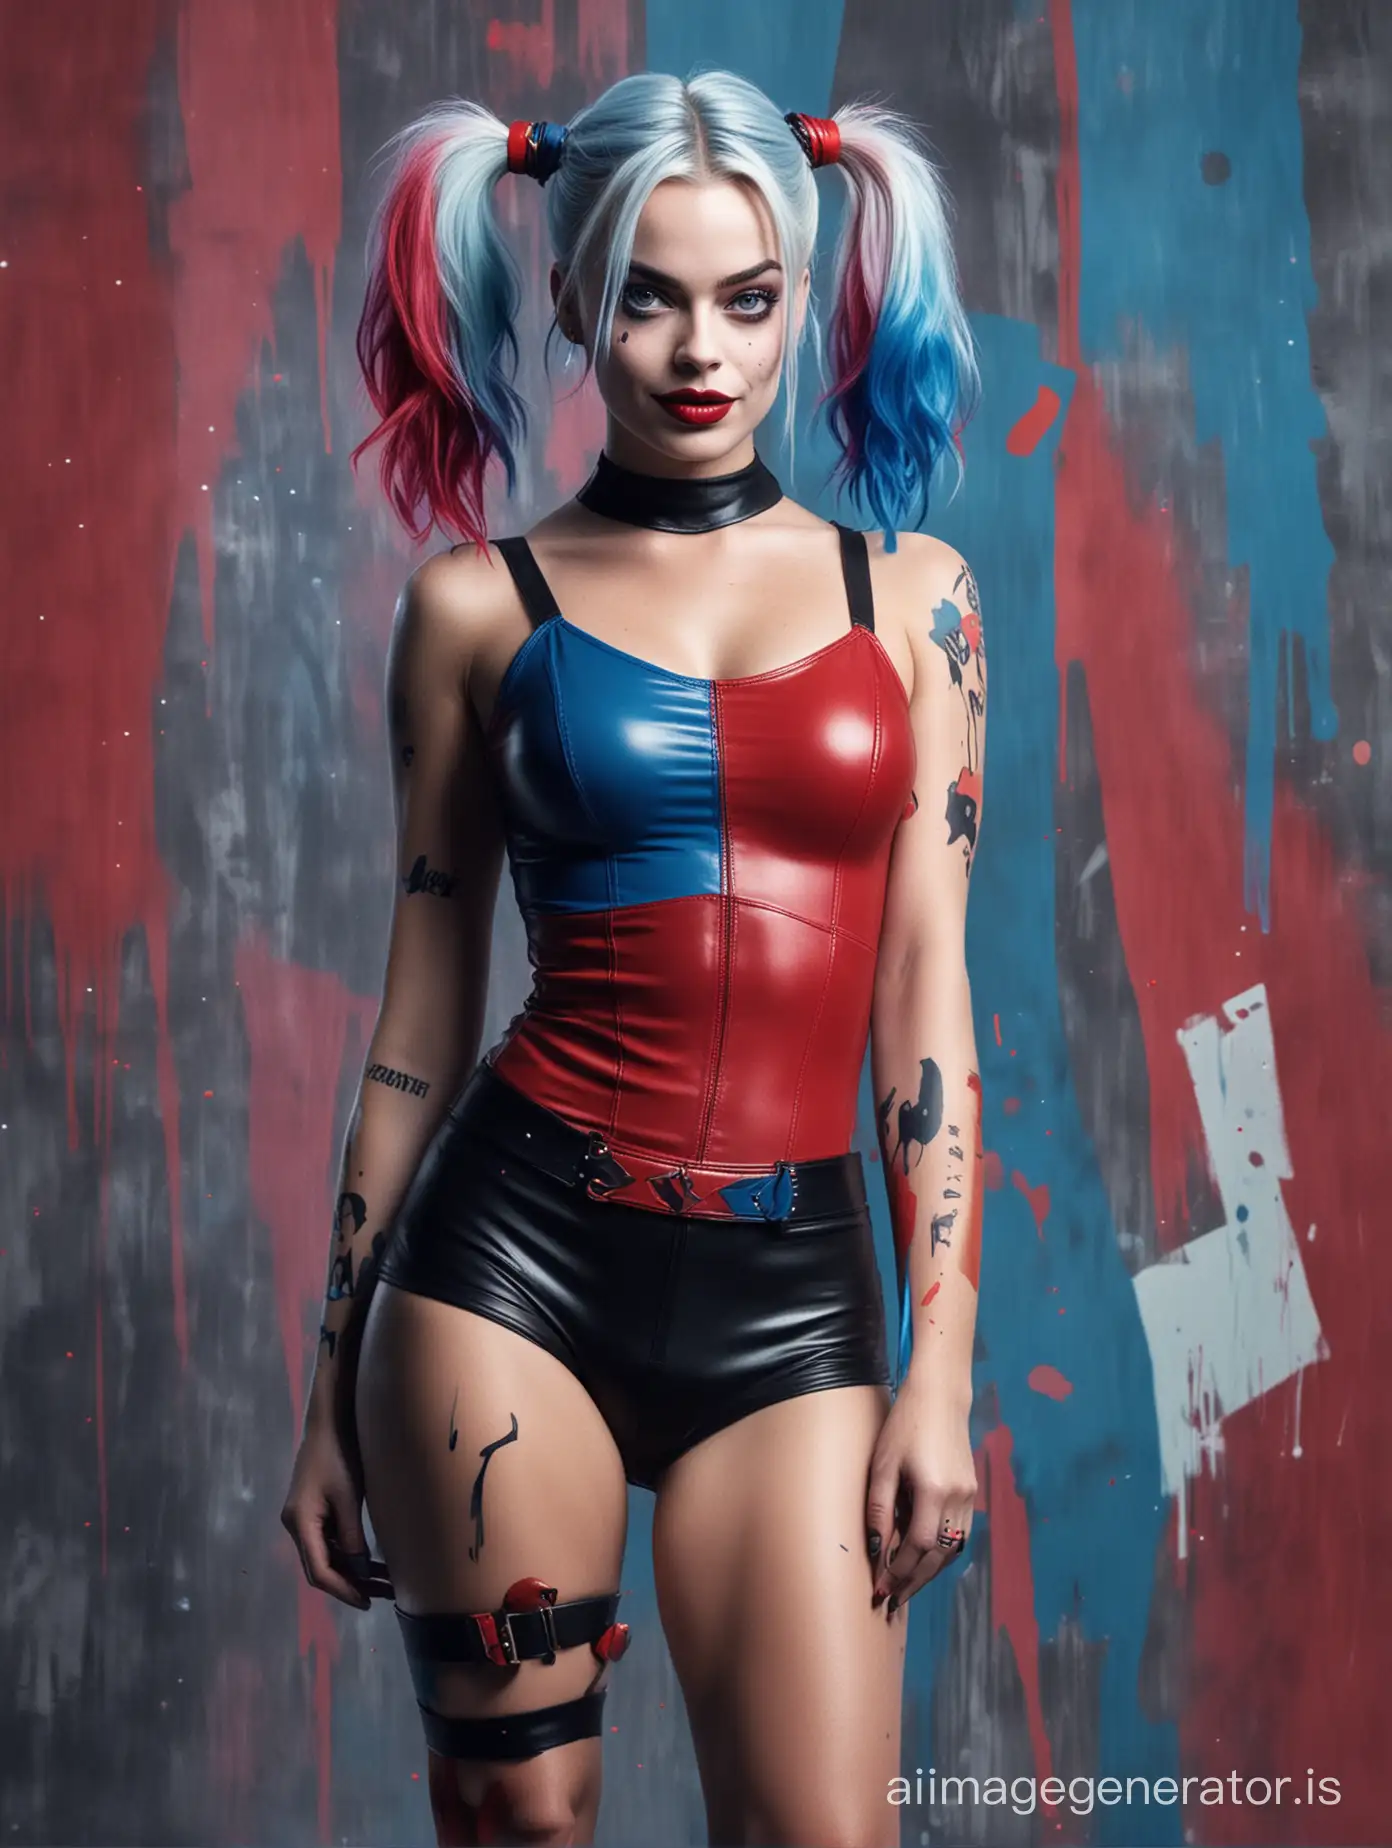 Margot-Robbie-as-Harley-Quinn-with-Red-and-Blue-Hair-on-Abstract-Background